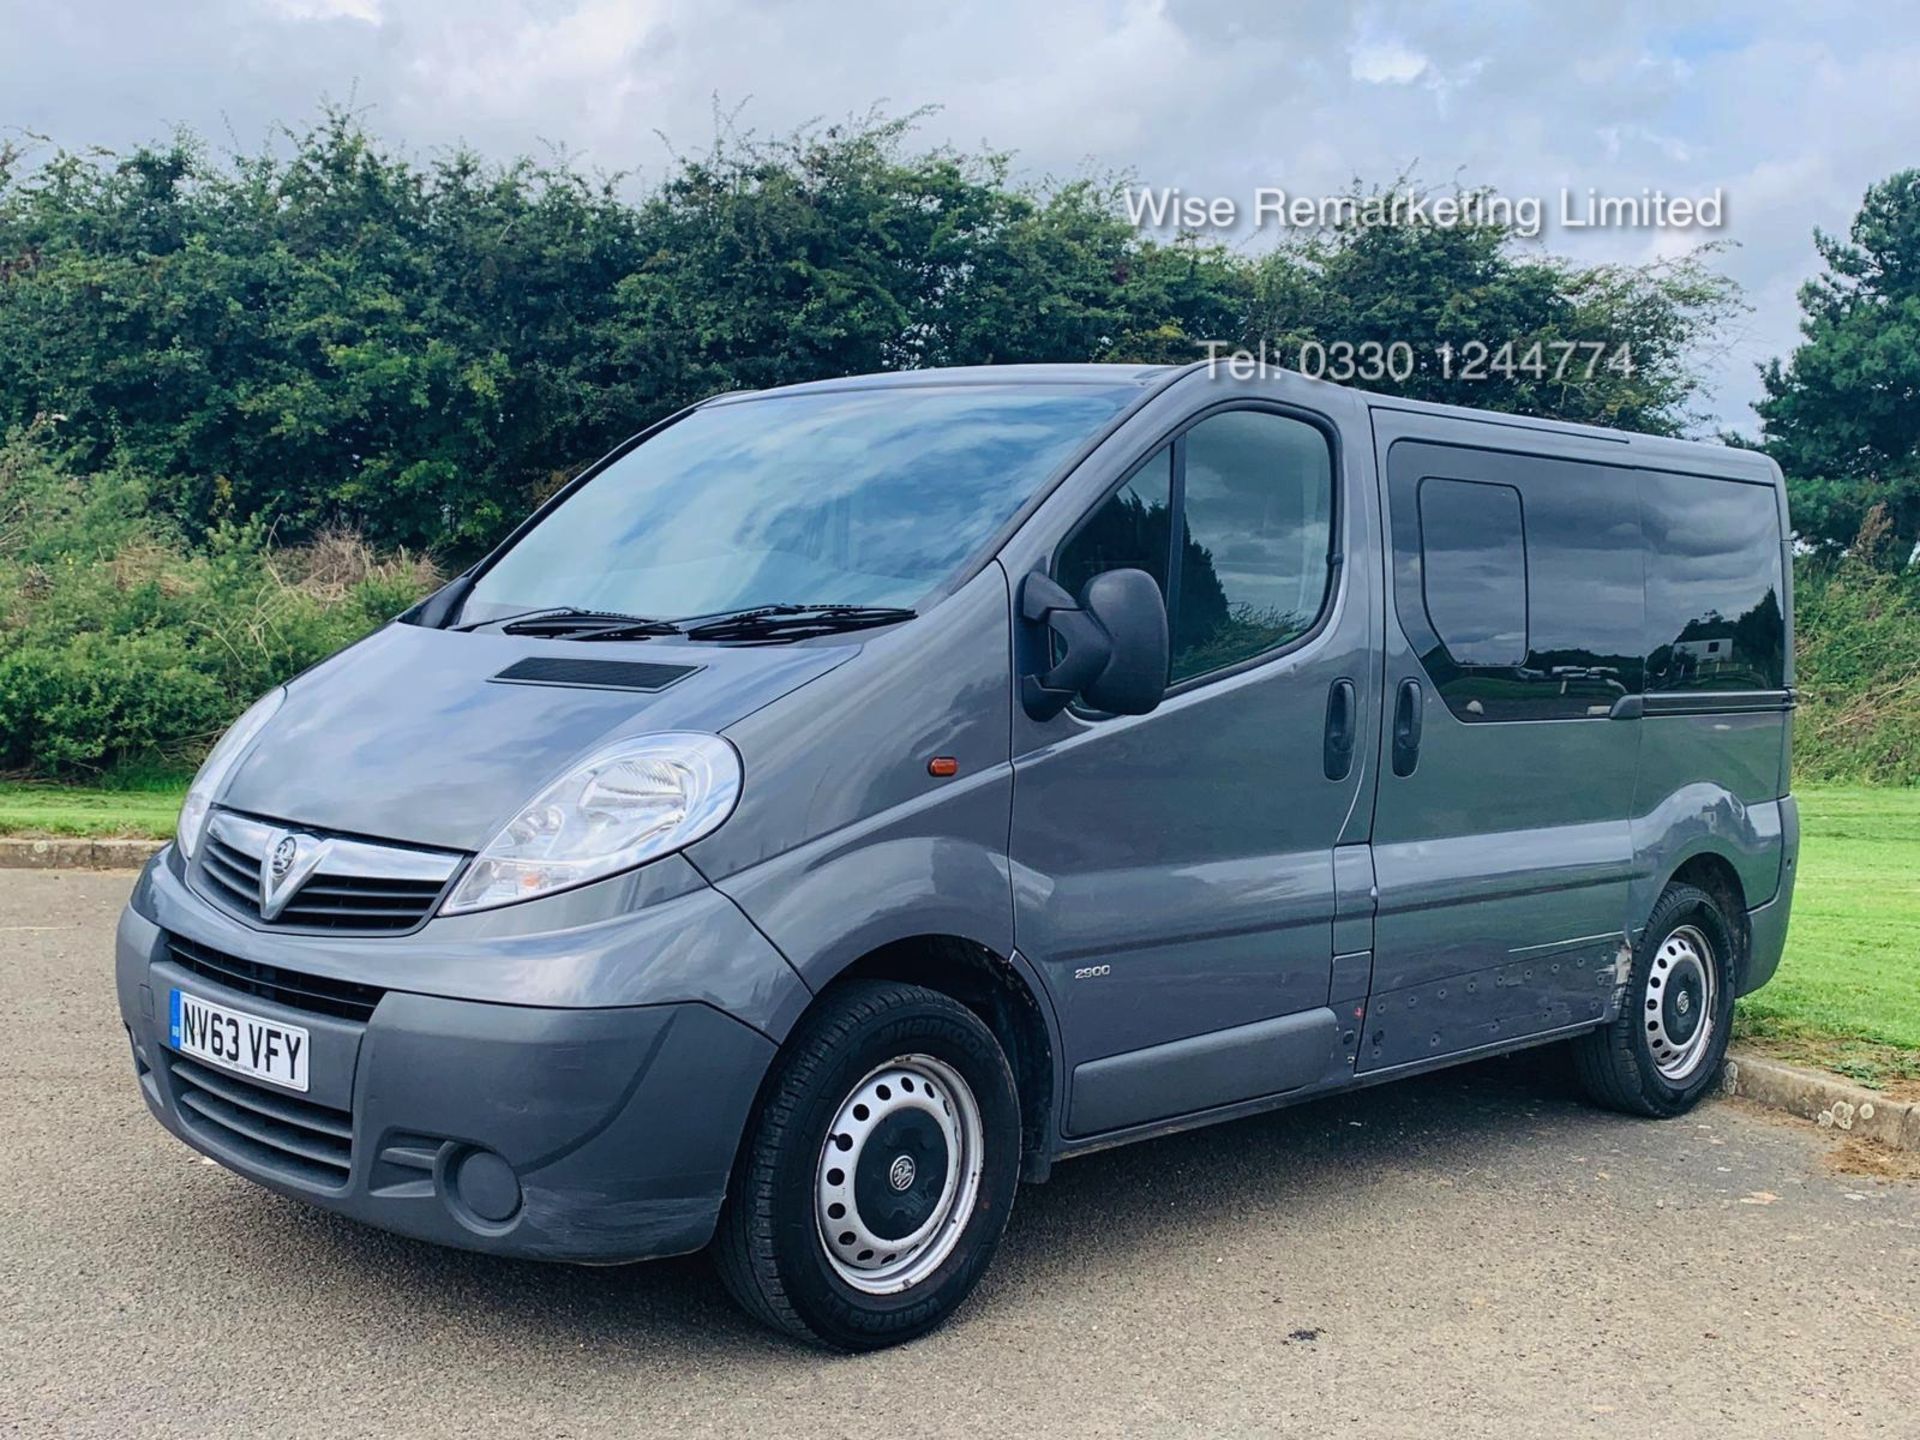 Vauxhall Vivaro 2.0 CDTI 2900 Minibus - 2014 Model - Wheel Chair Access -1 Owner From New -History - Image 5 of 21